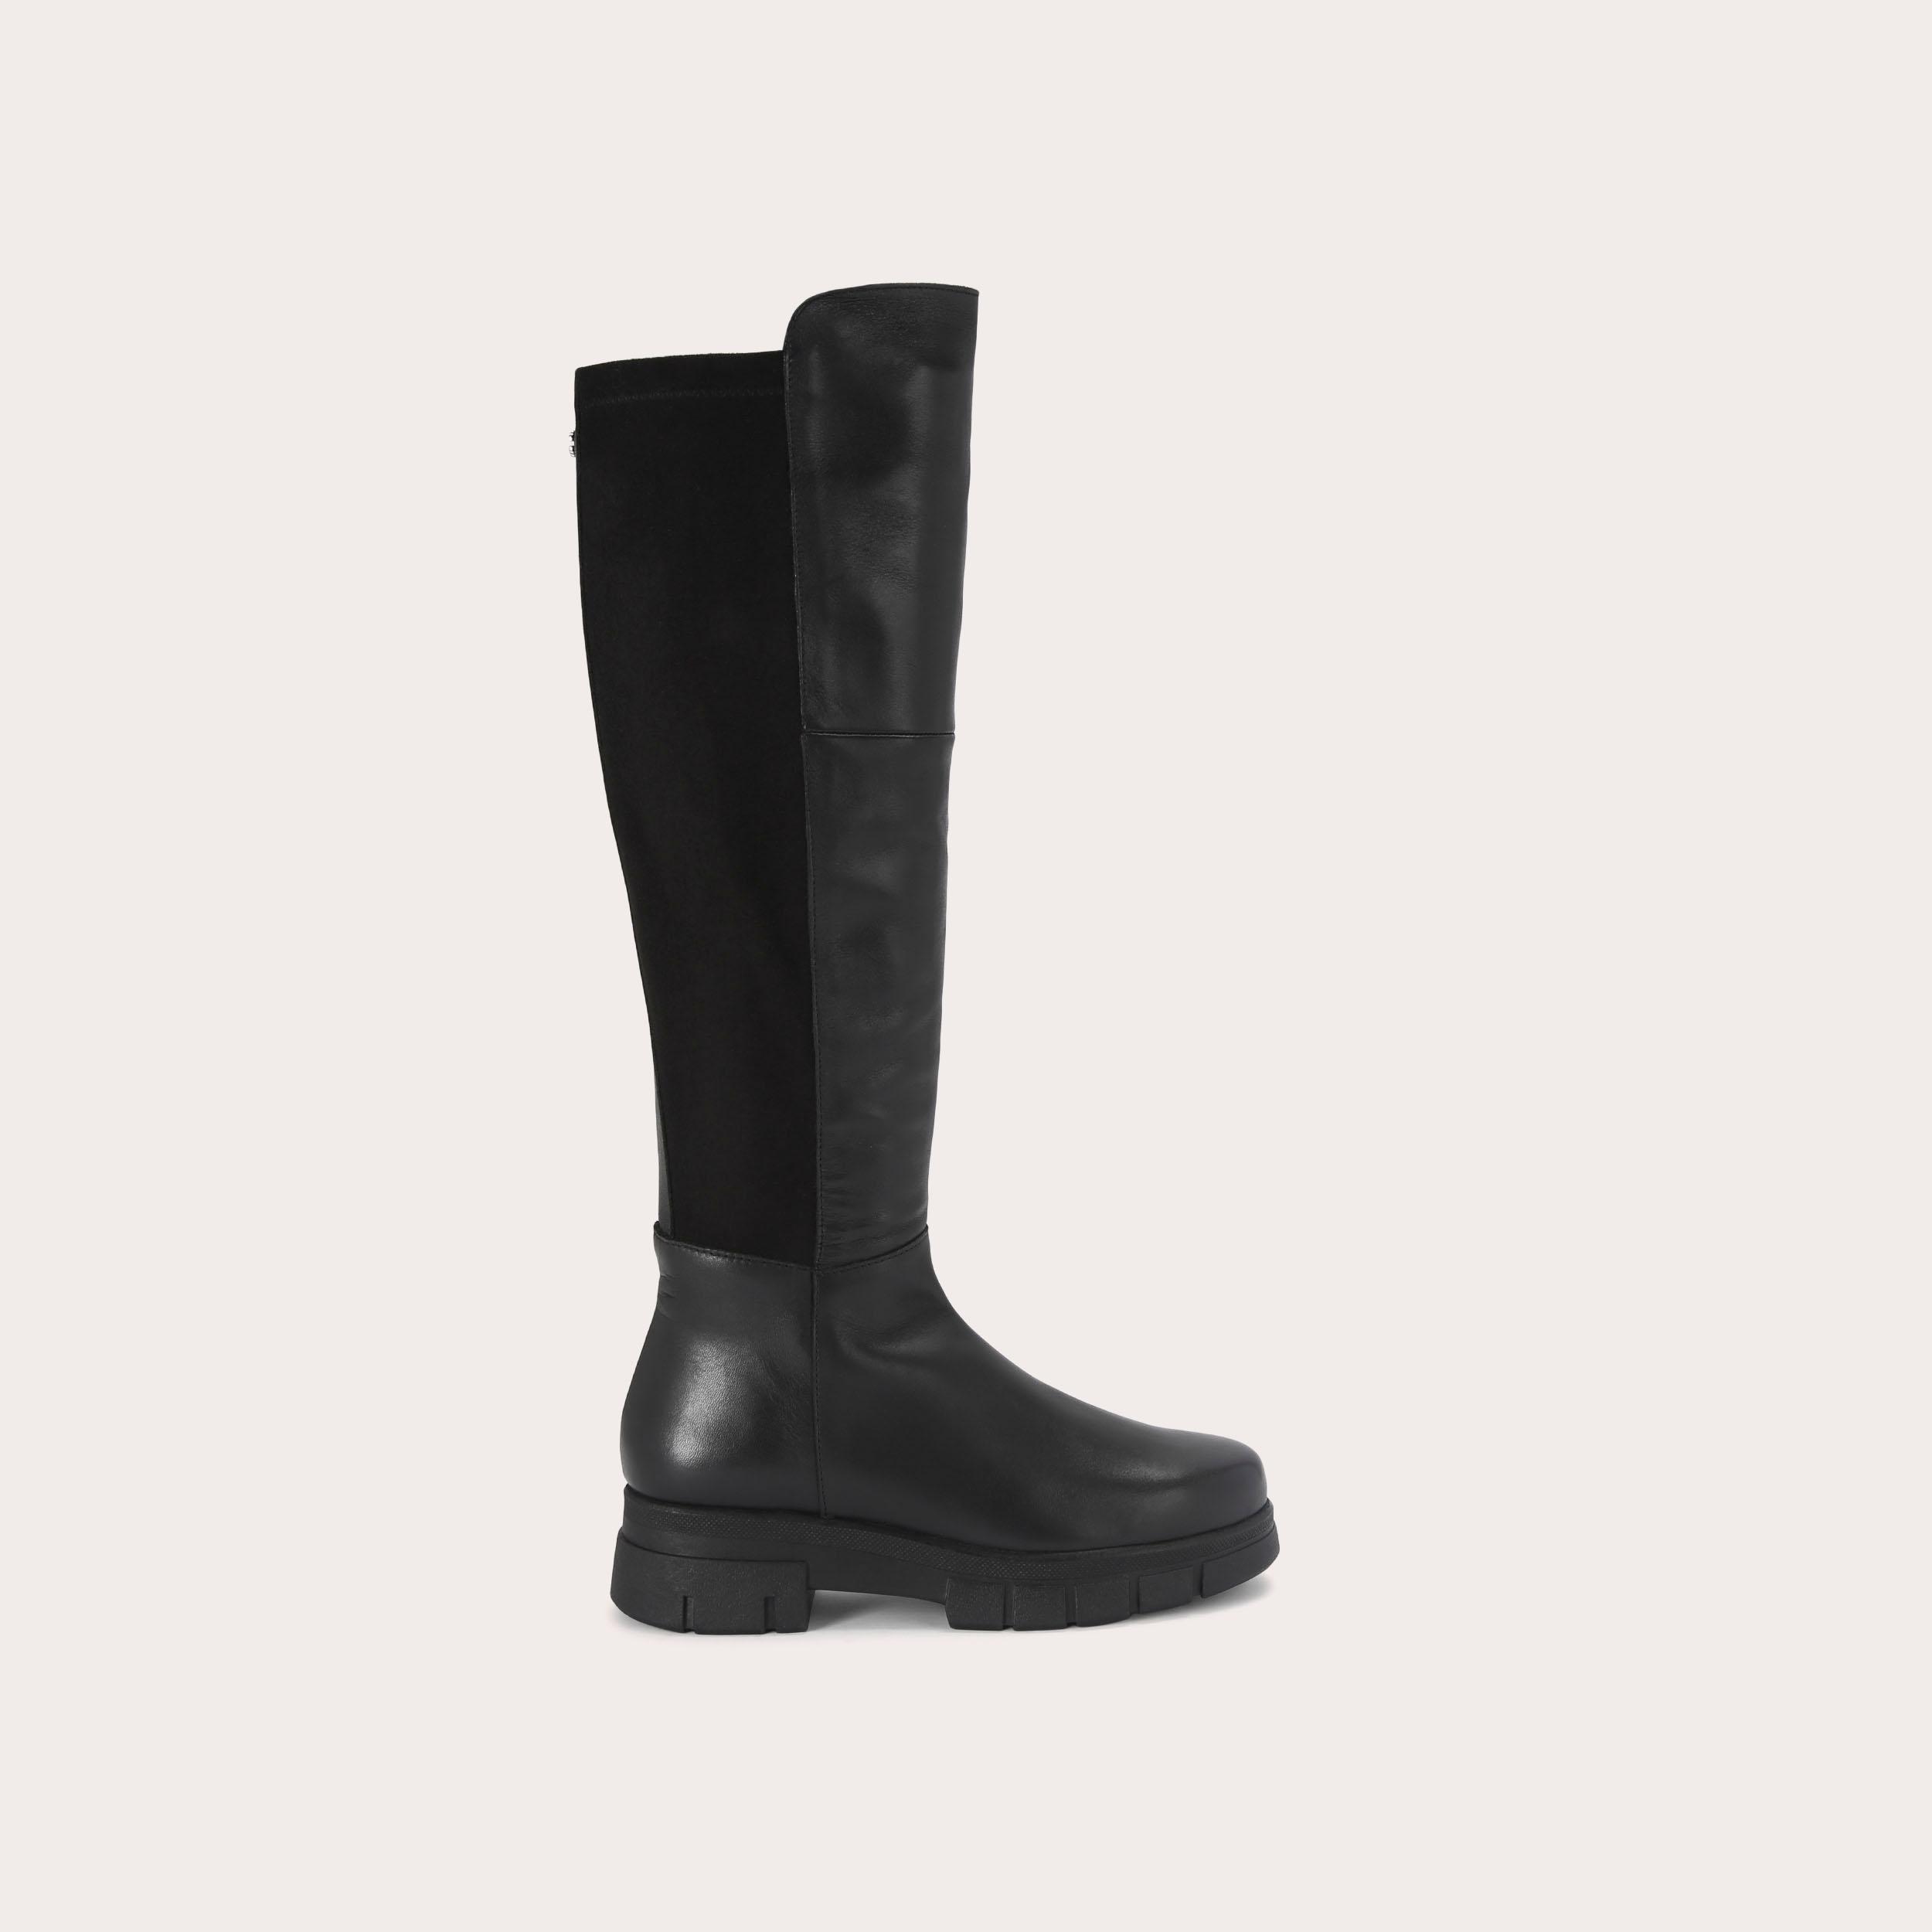 Knee High Boots | Leather & Suede Women's Boots | Carvela